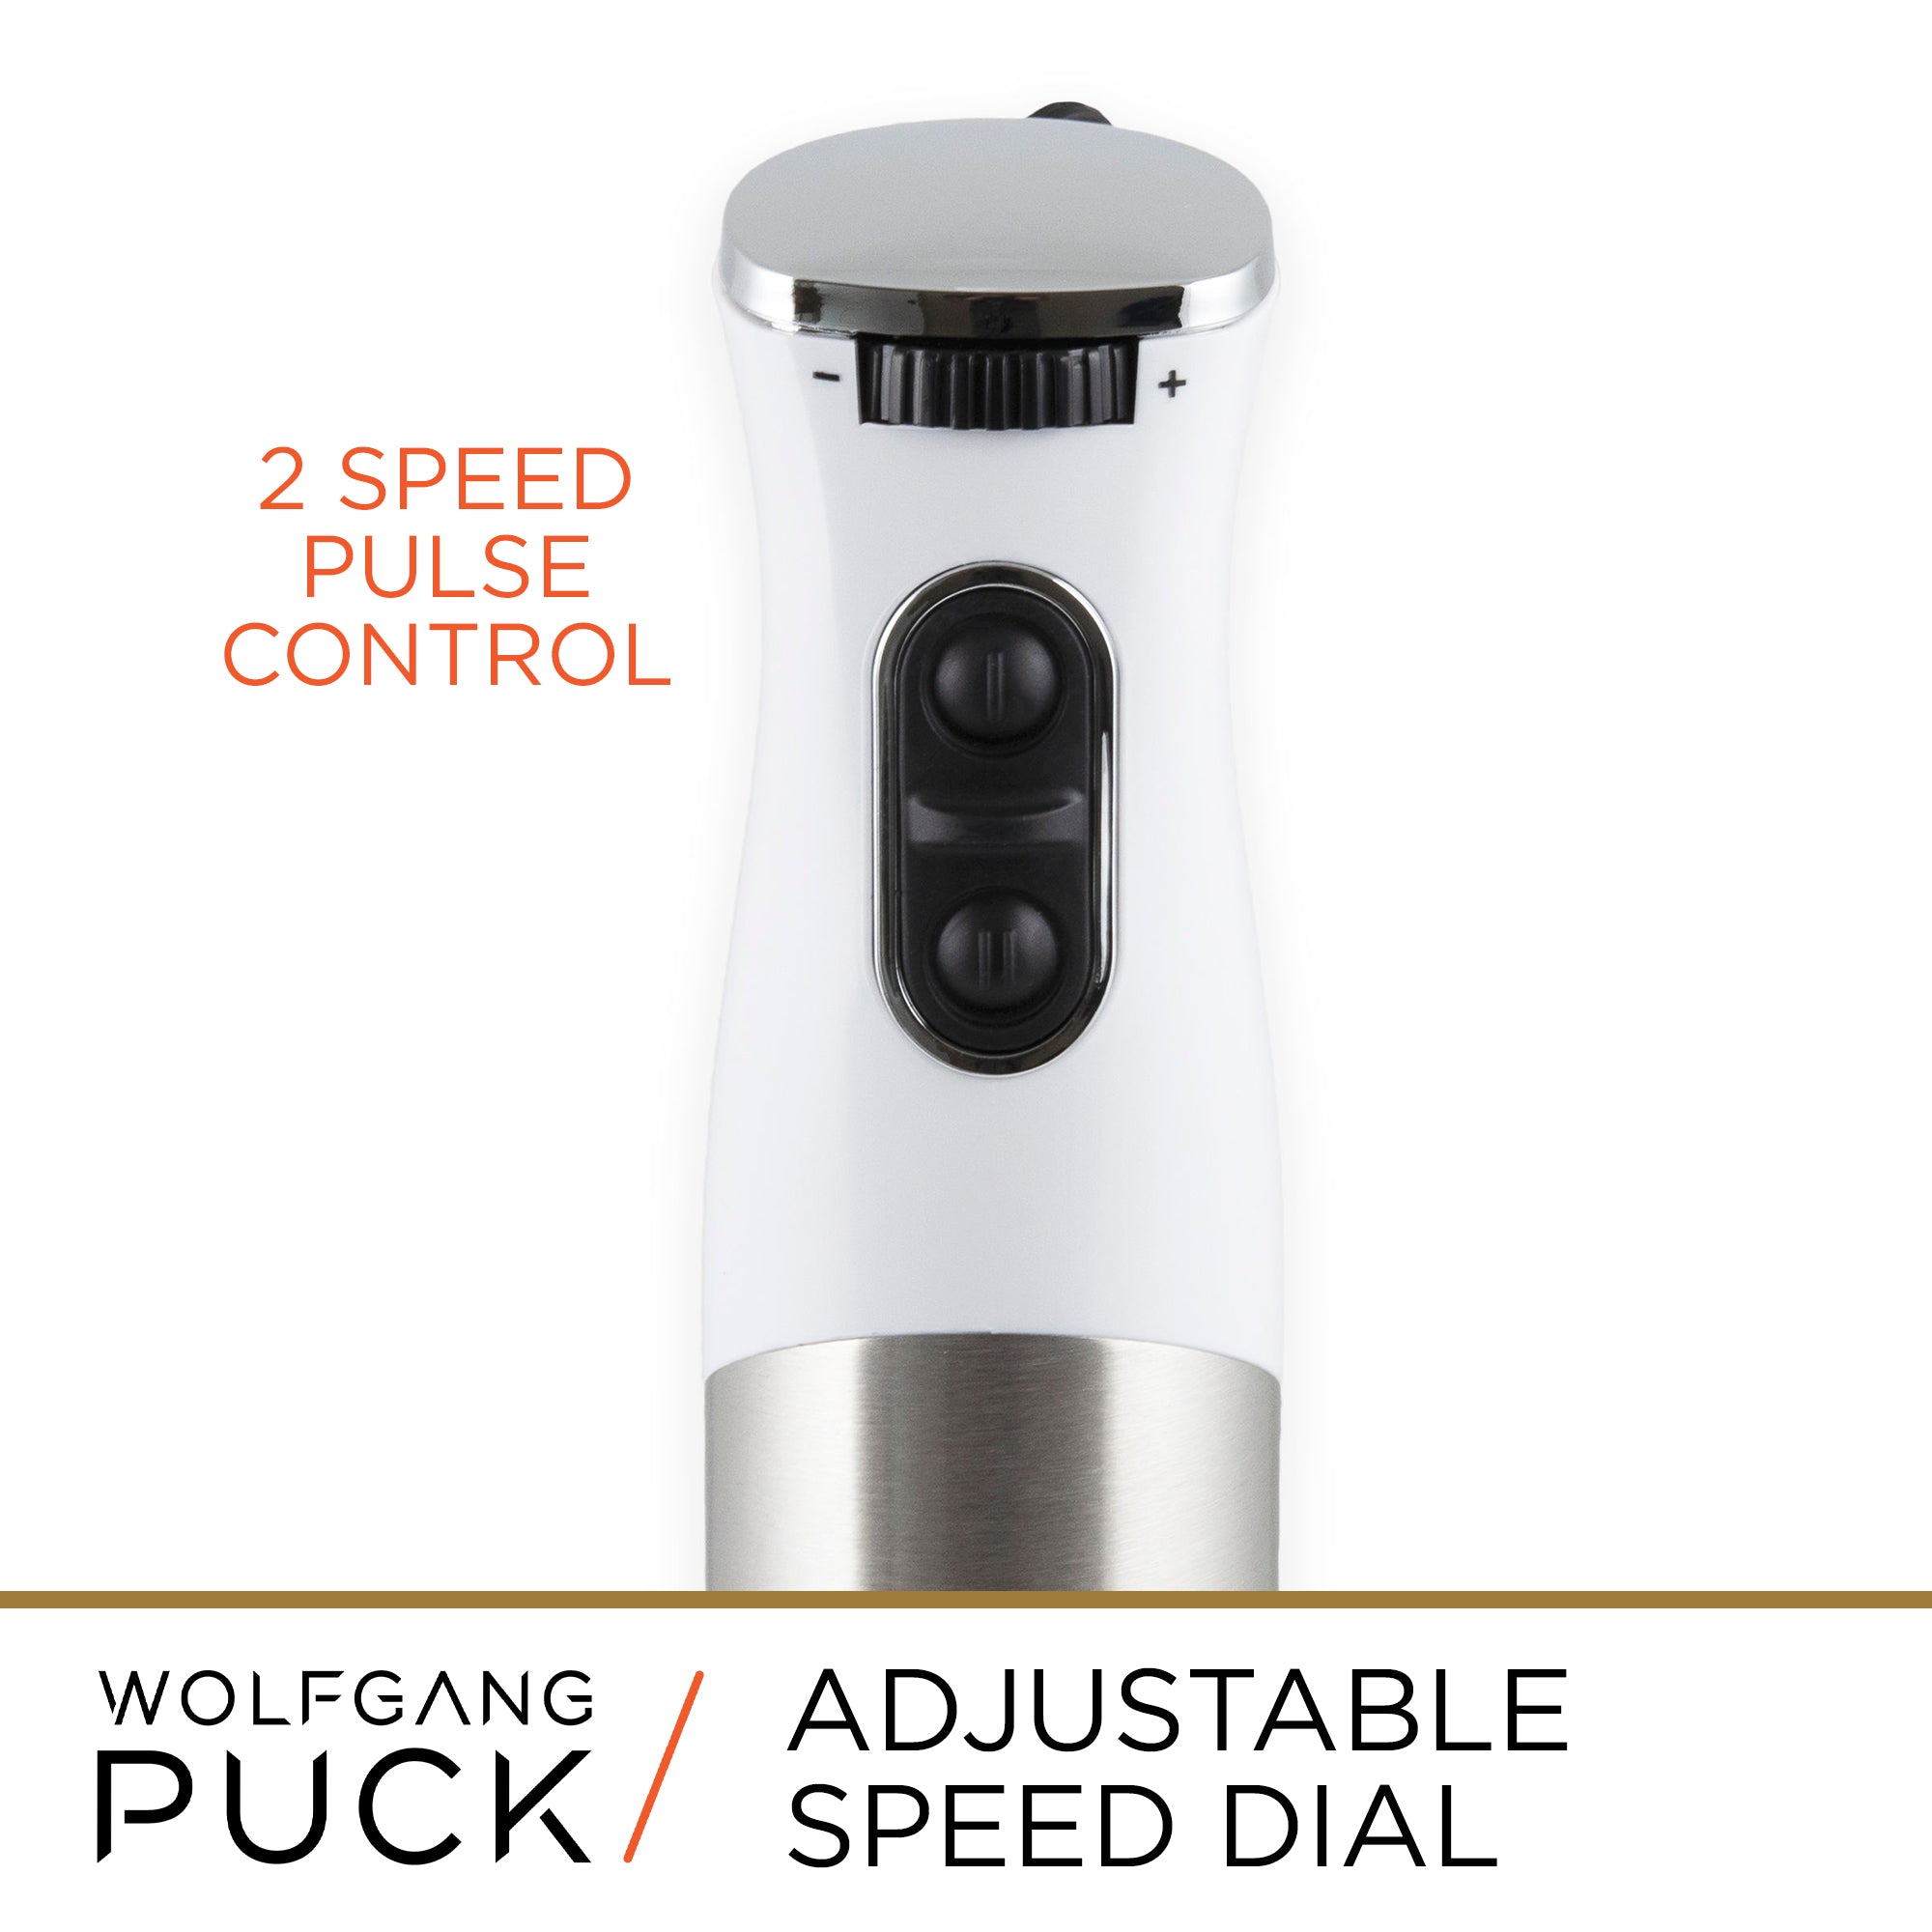 Wolfgang Puck 7-in-1 Immersion Blender – Wolfgang Puck Home